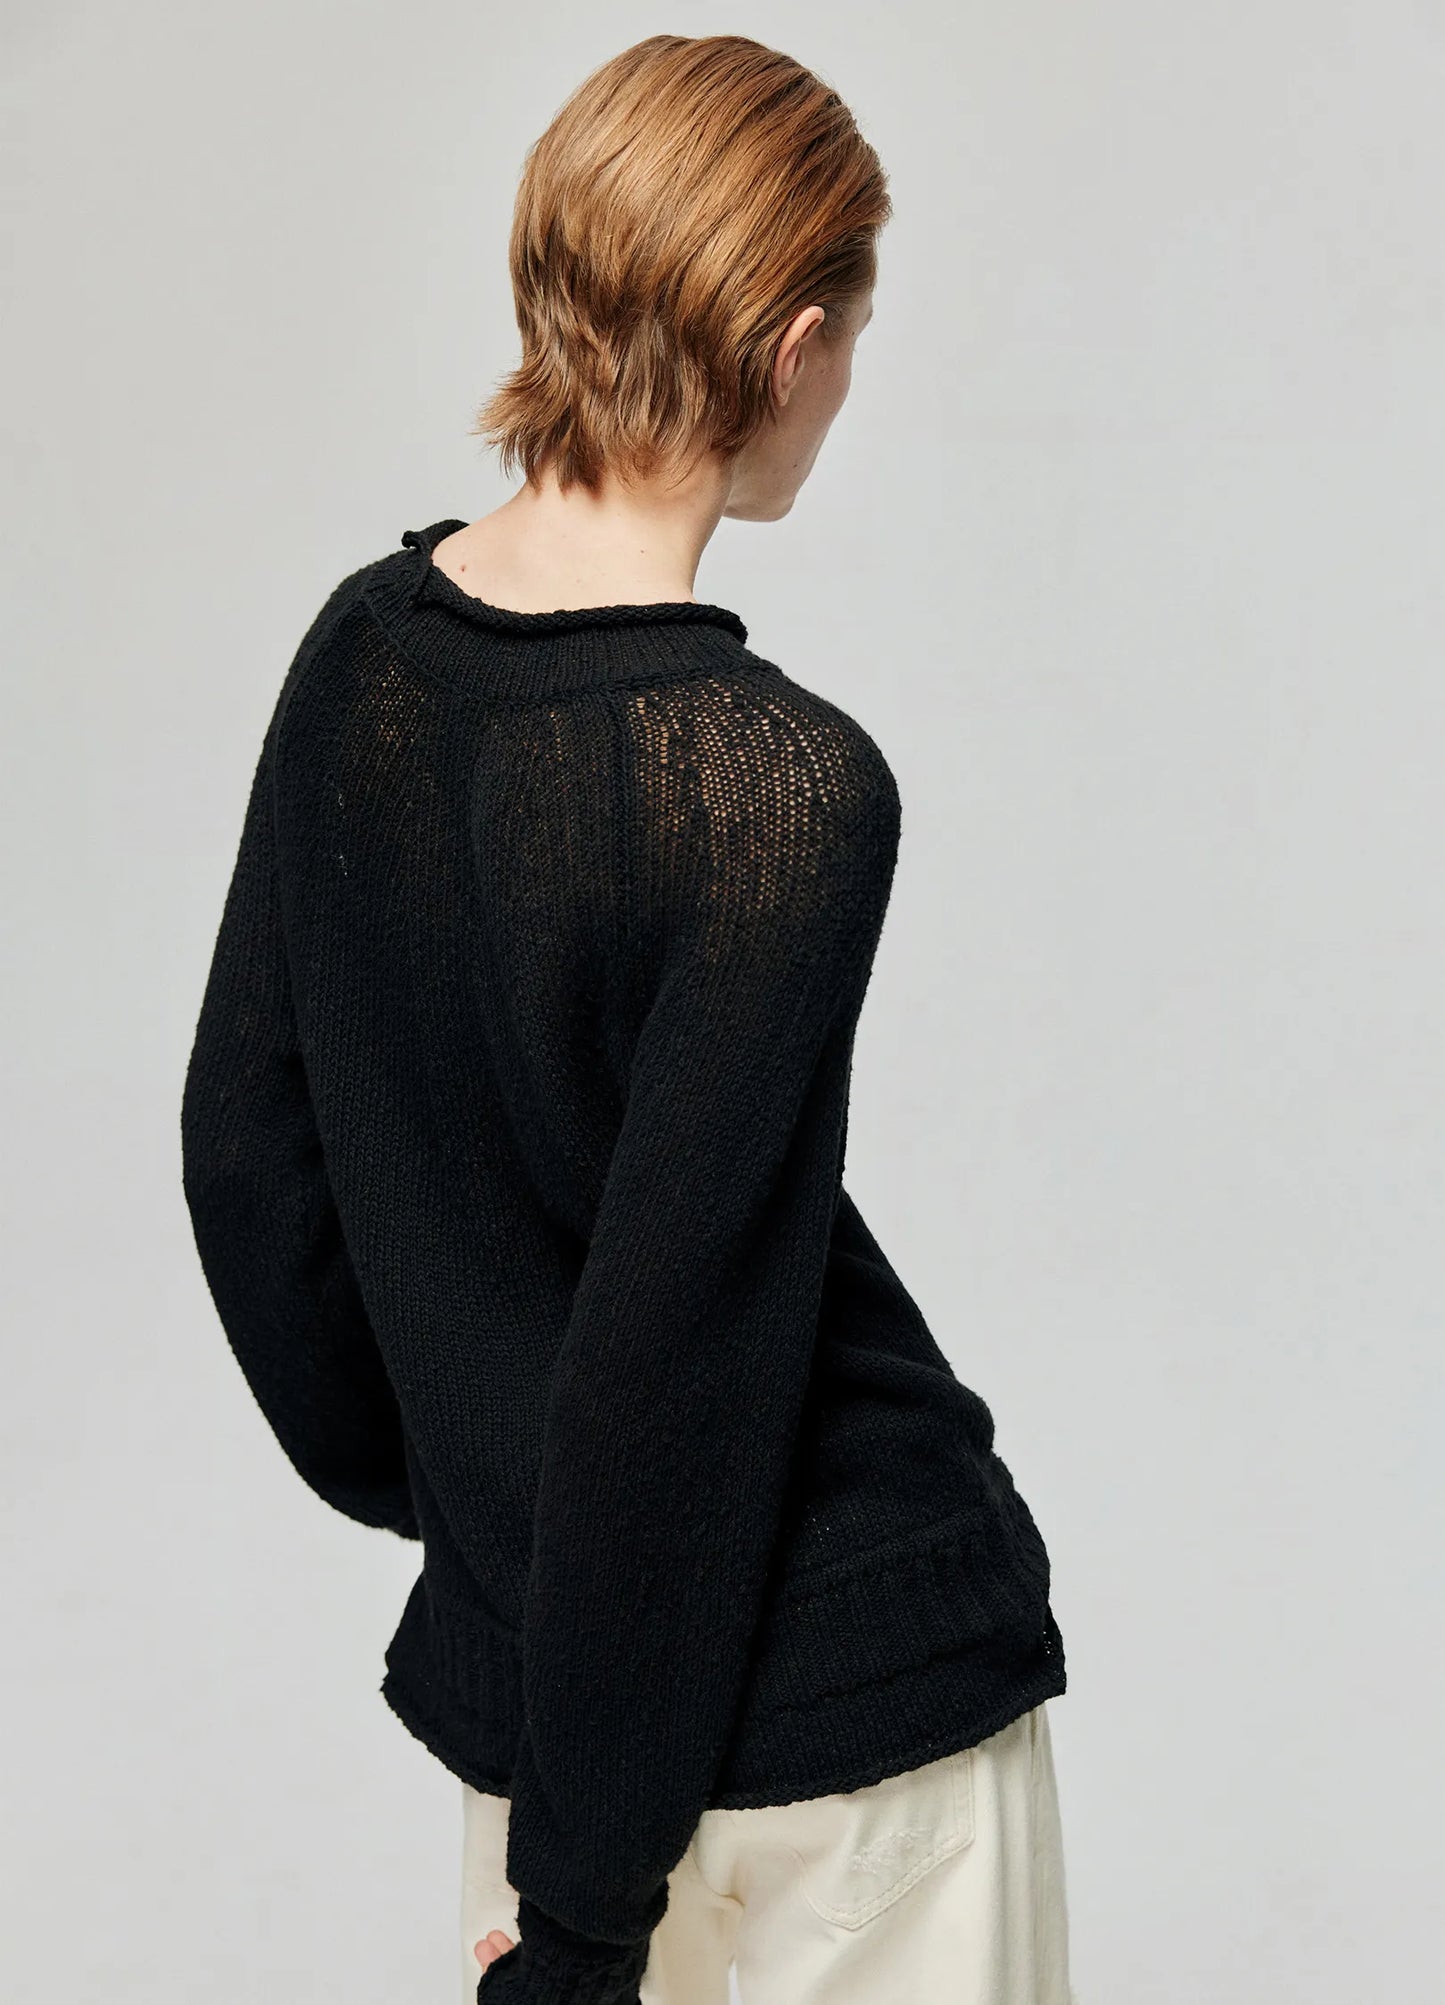 Rolled Edge Knit Sweater